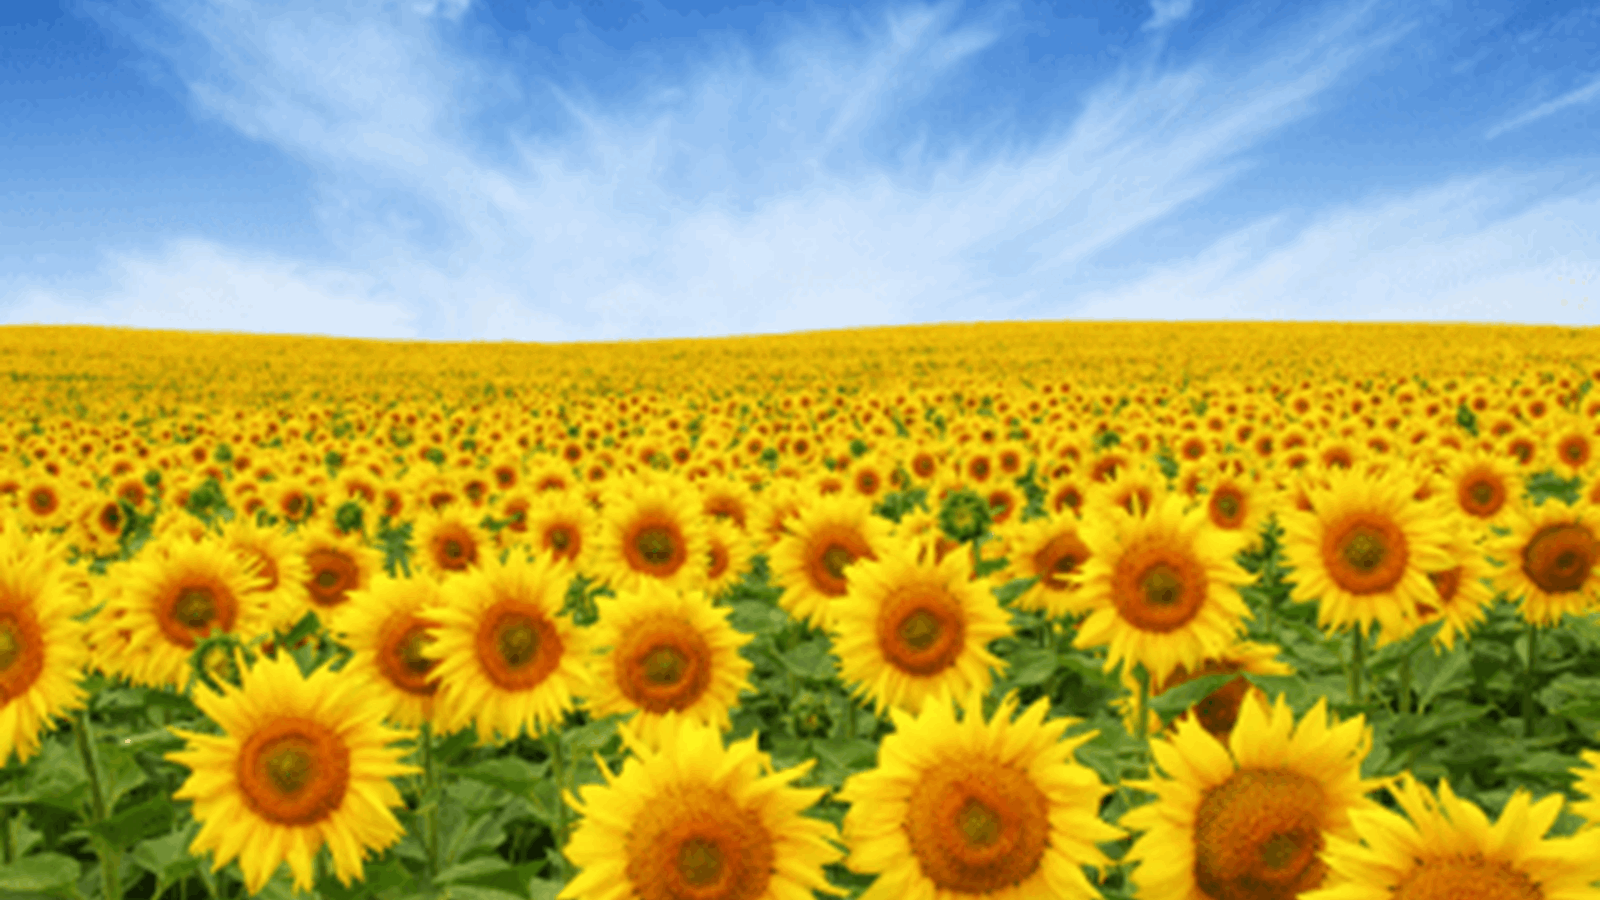 Field Of Sunflowers And Blue Sky (2)